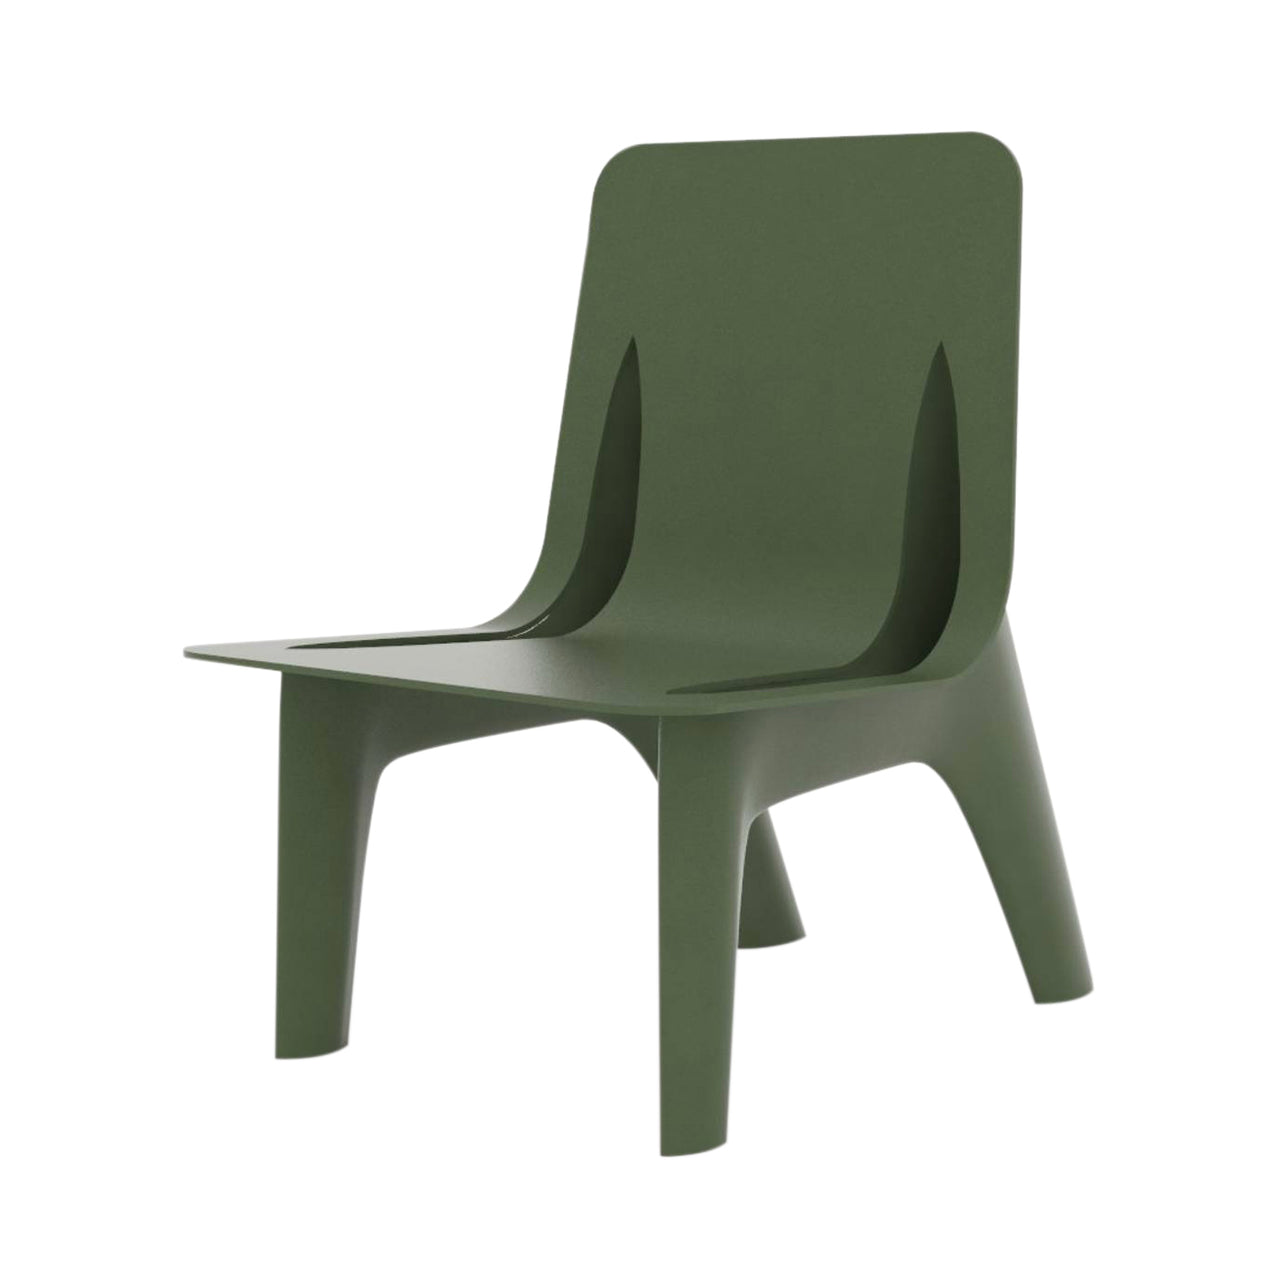 J-Chair: Olive Green